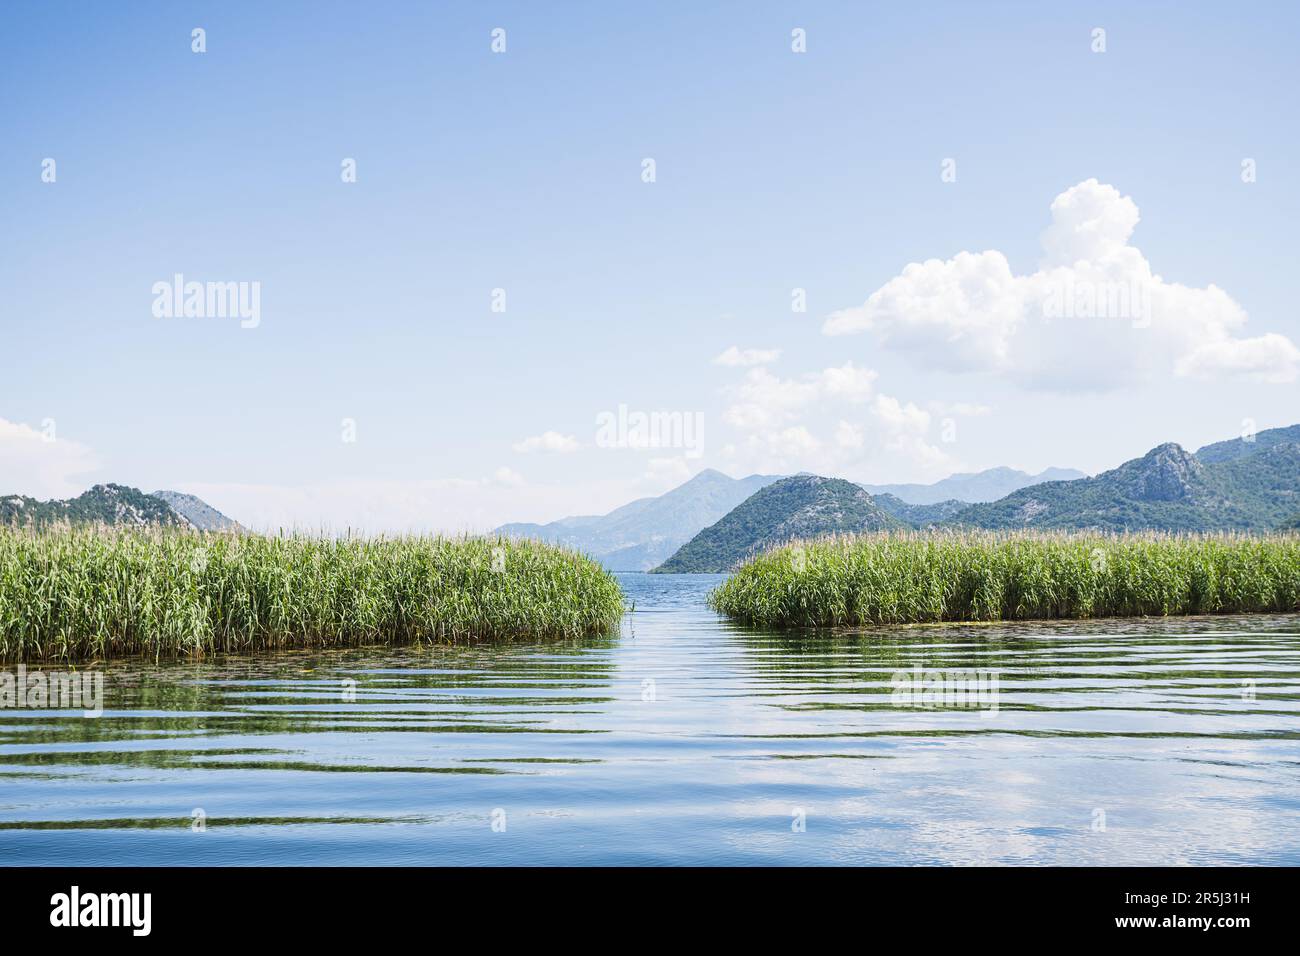 A gap between the reeds on River Crnojevica leads to Lake Skadar in Montenegro surrounded by mountain peaks. Stock Photo